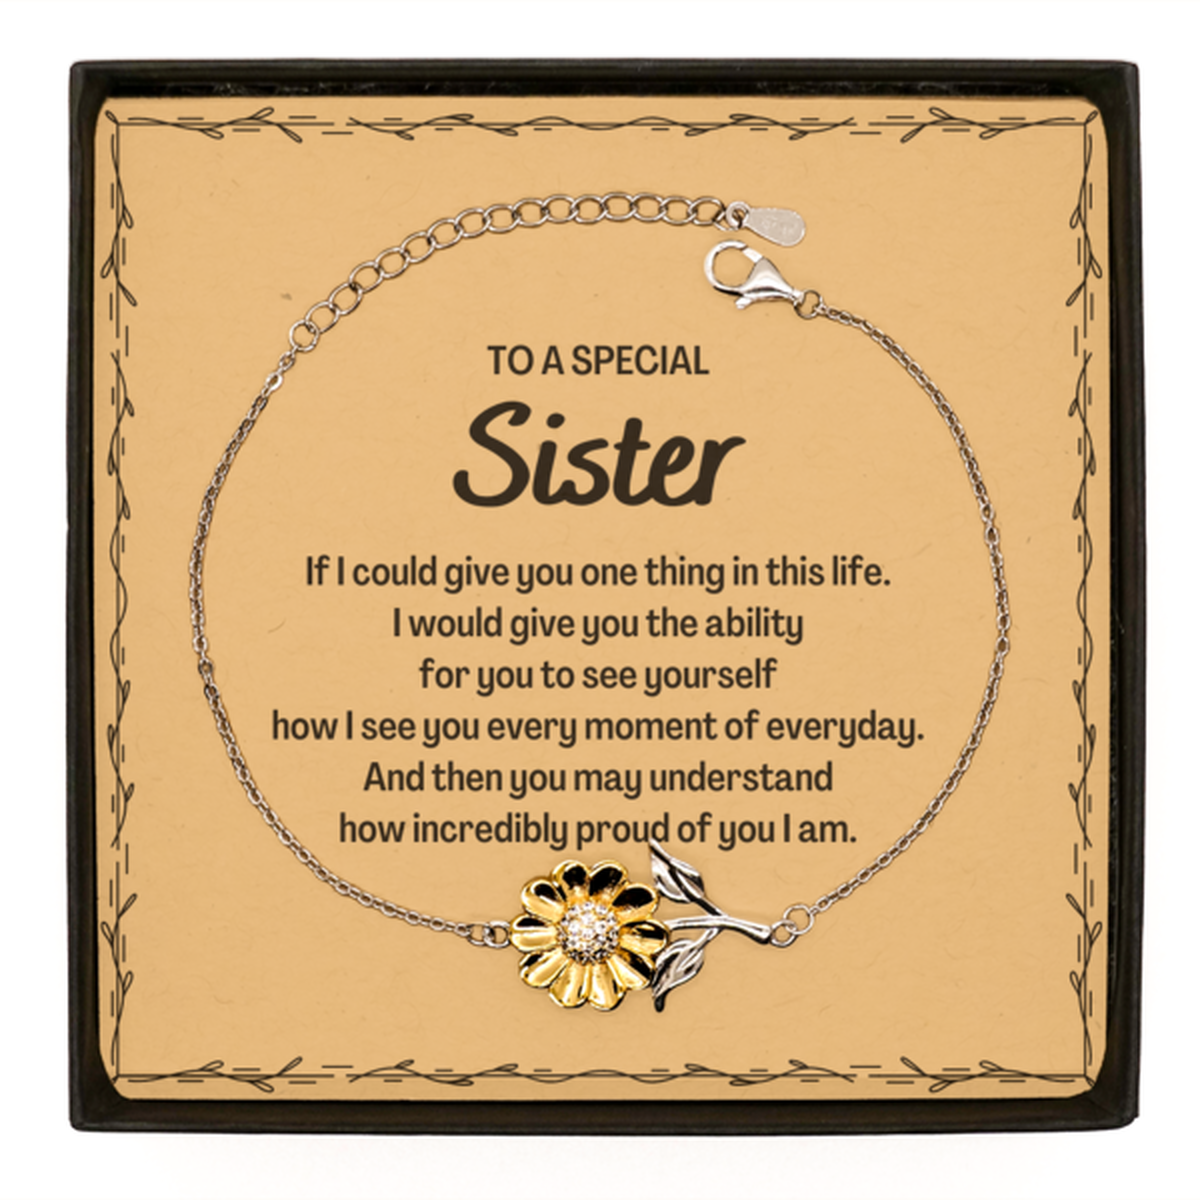 To My Sister Sunflower Bracelet, Gifts For Sister Message Card, Inspirational Gifts for Christmas Birthday, Epic Gifts for Sister To A Special Sister how incredibly proud of you I am